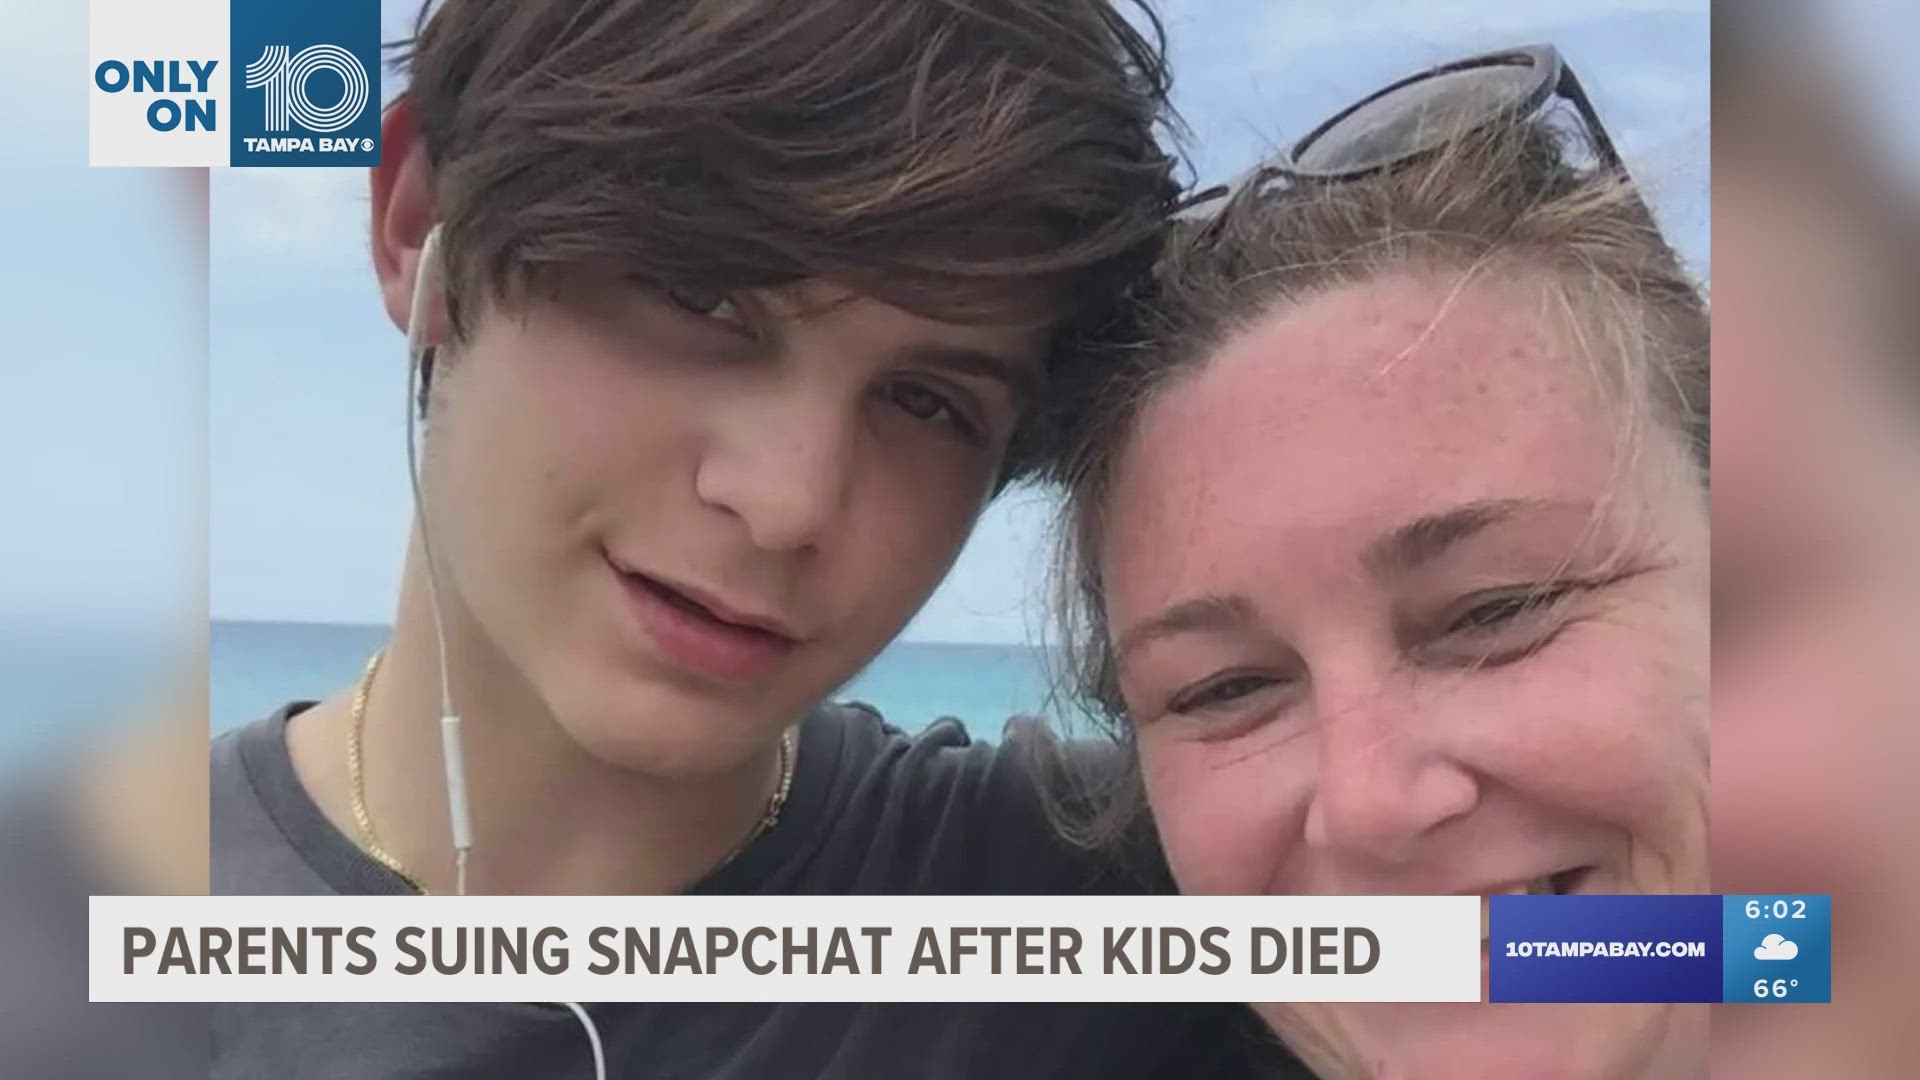 Two Florida mothers shared how they believe Snapchat contributed to the deaths of their teen sons.